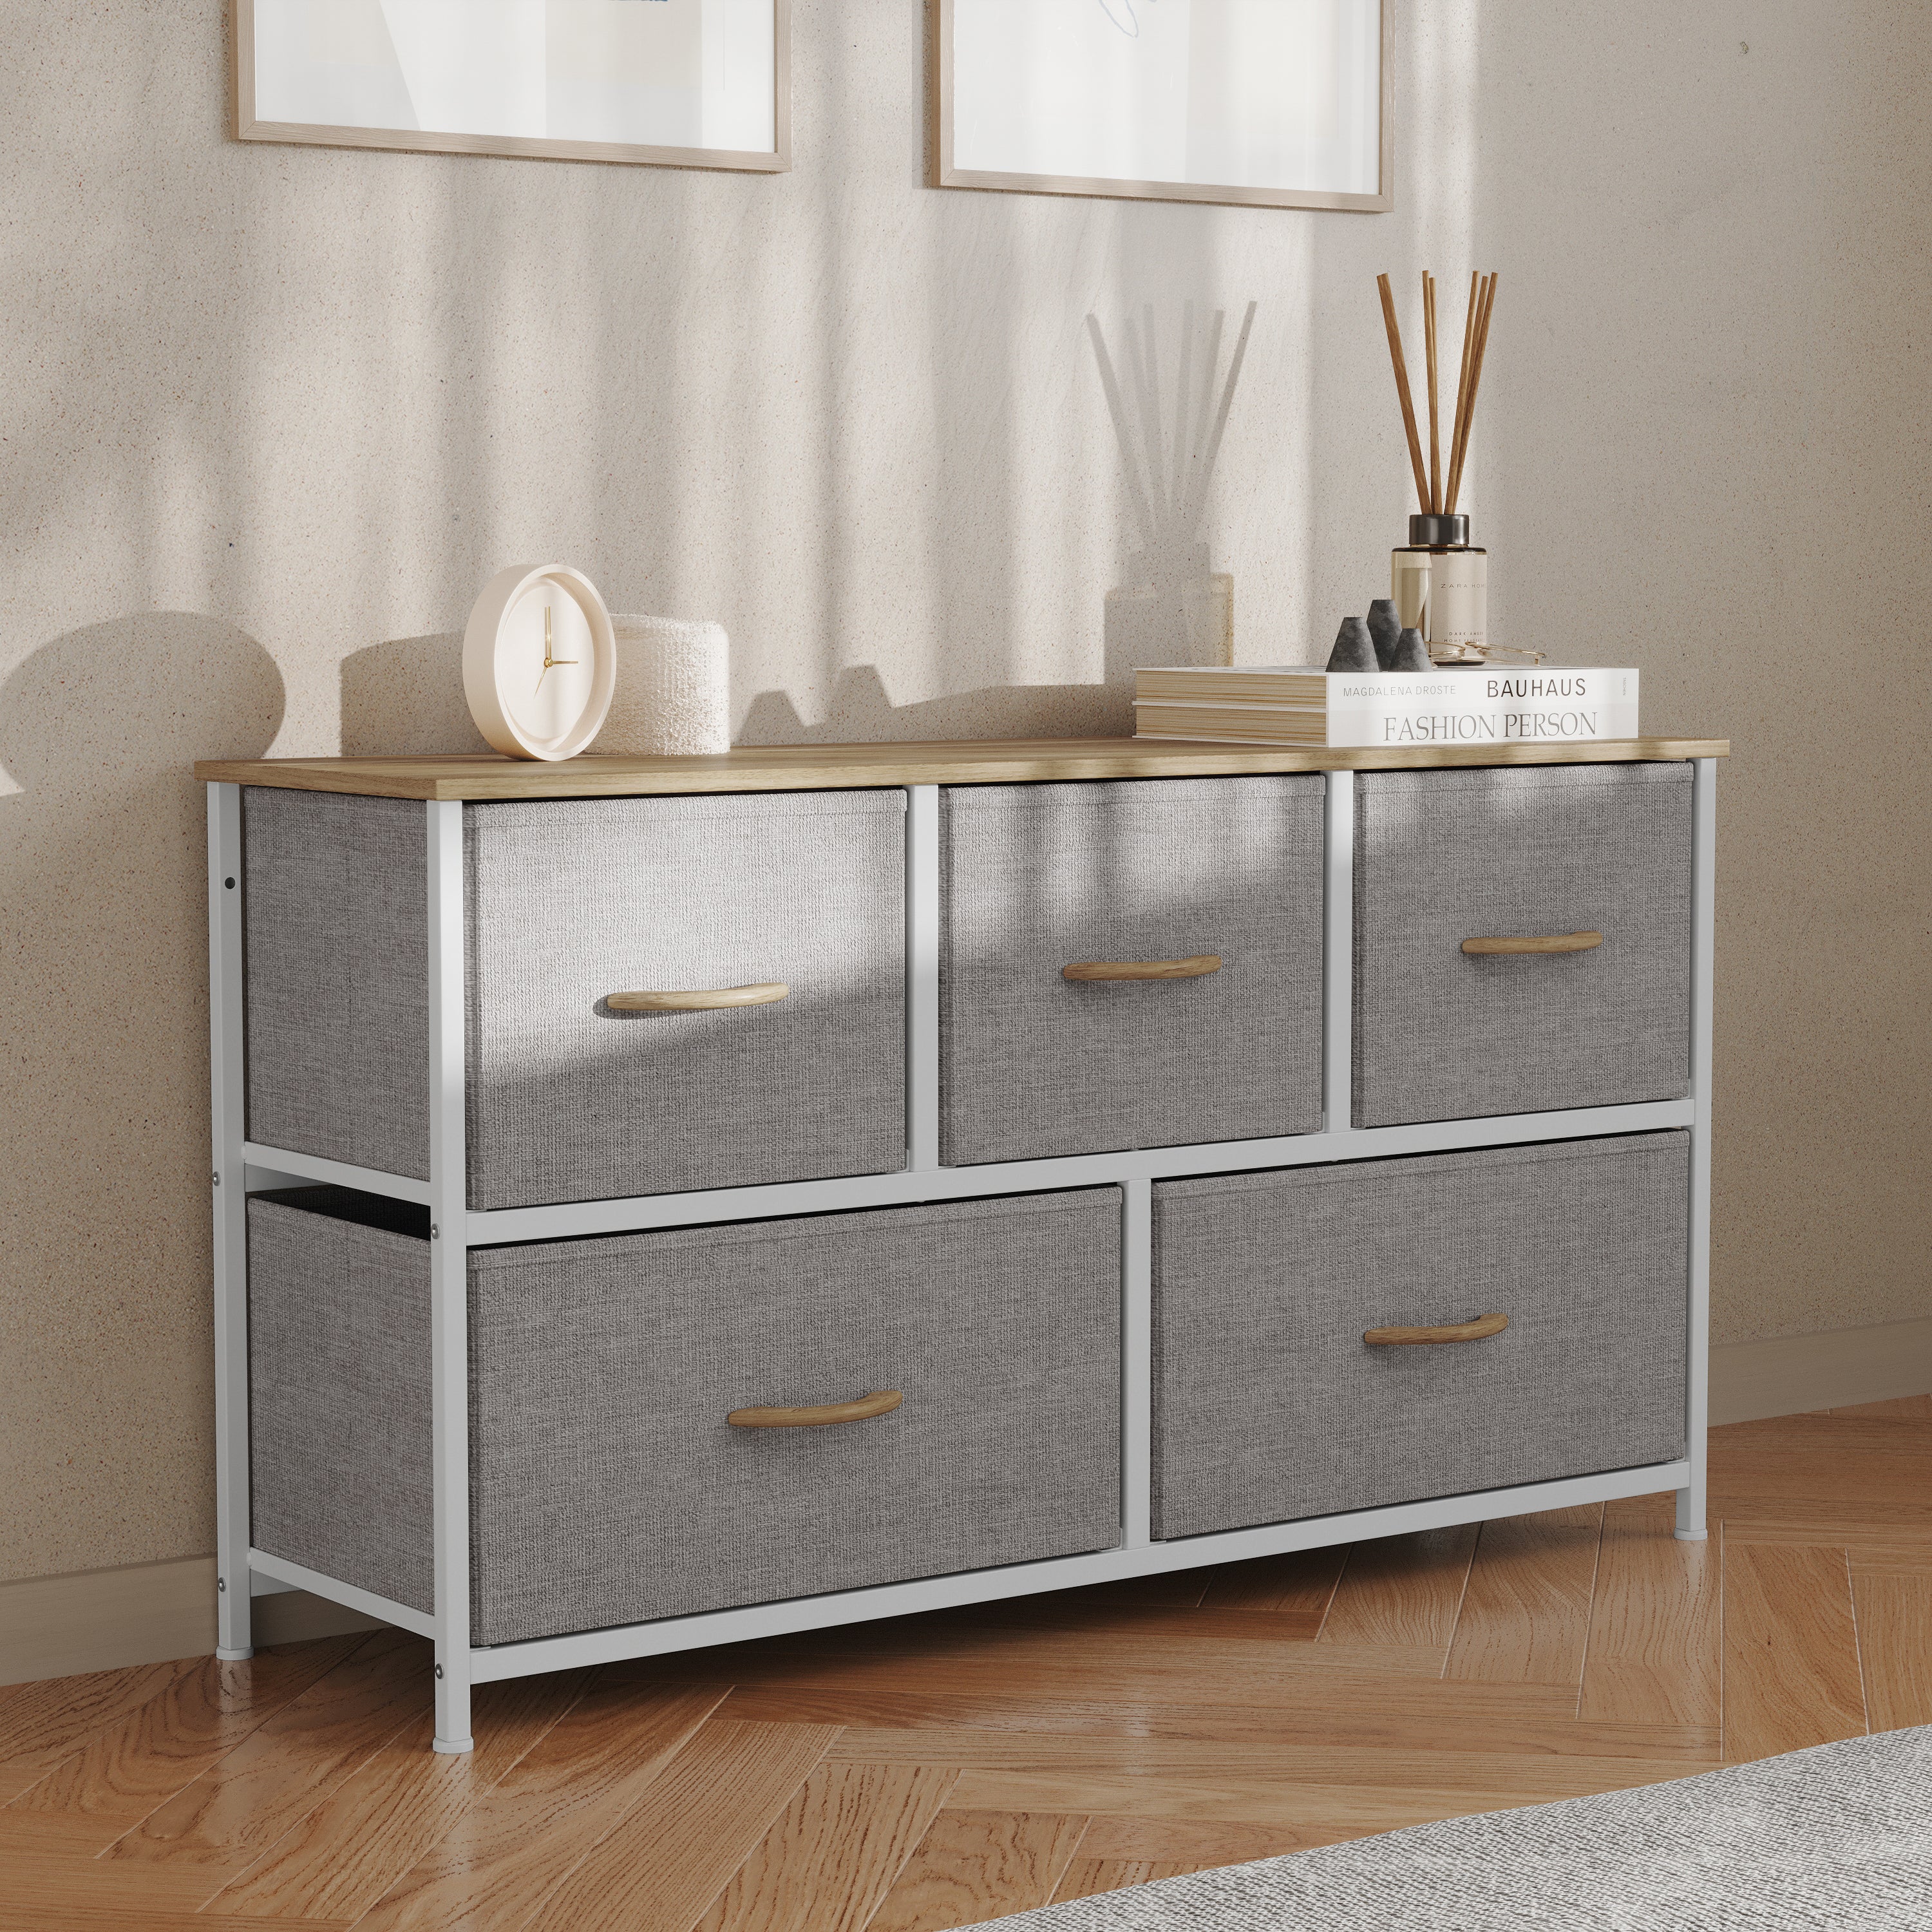 Harris 5 Drawer Vertical Storage Dresser with Cast Iron Frame, Wood Top and Easy Pull Fabric Drawers with Wooden Handles-Dresser-Flash Furniture-Wall2Wall Furnishings